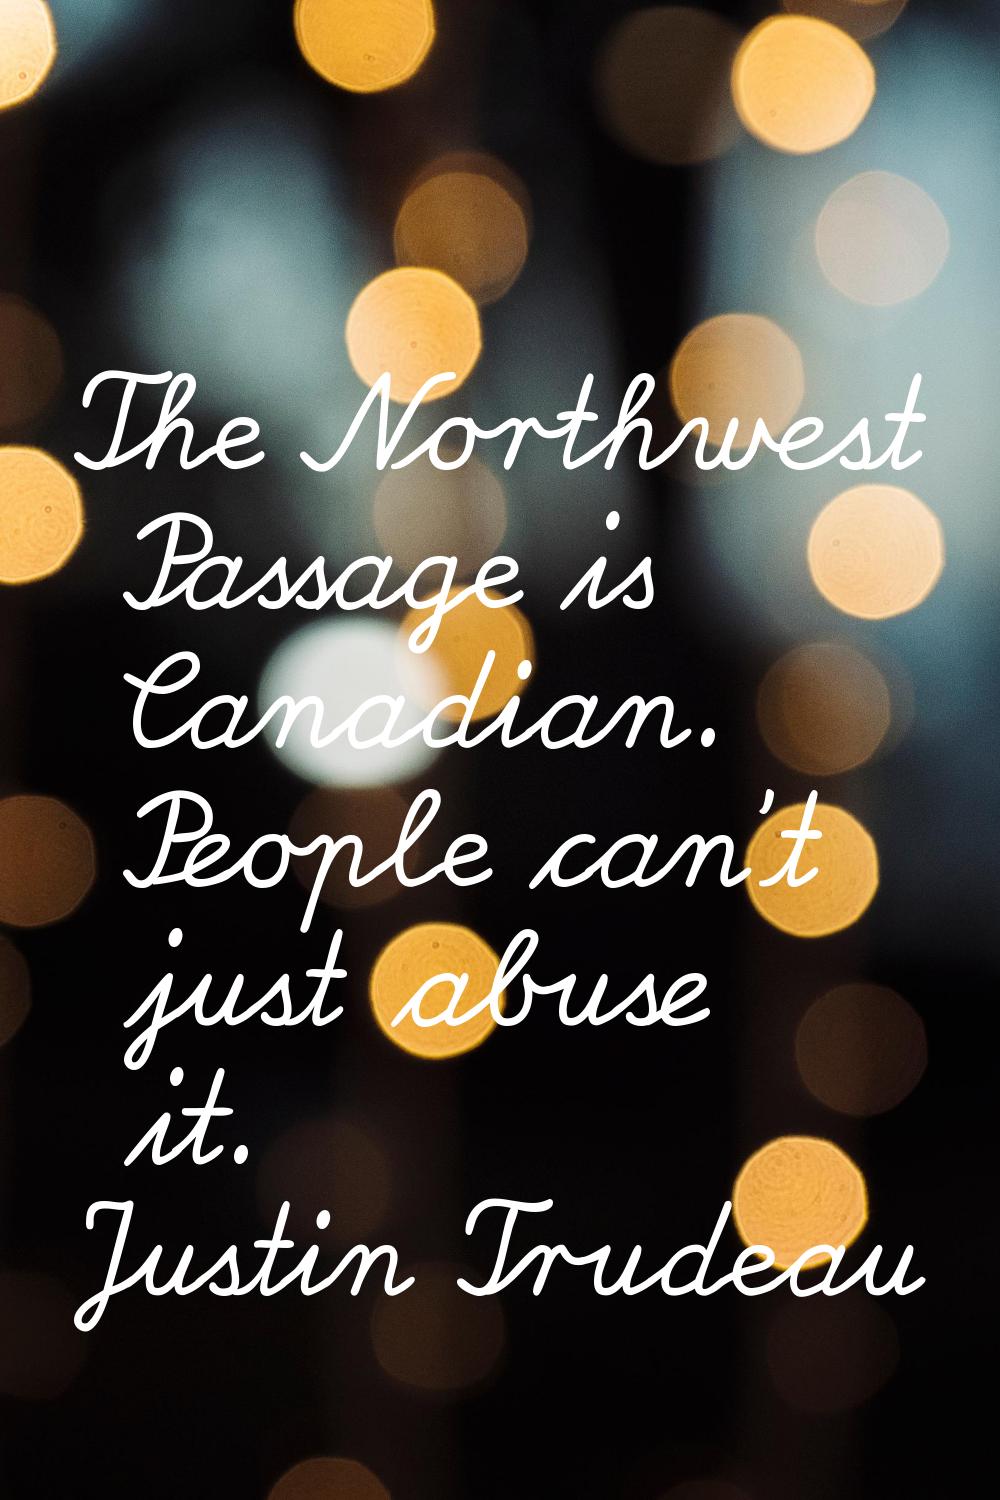 The Northwest Passage is Canadian. People can't just abuse it.